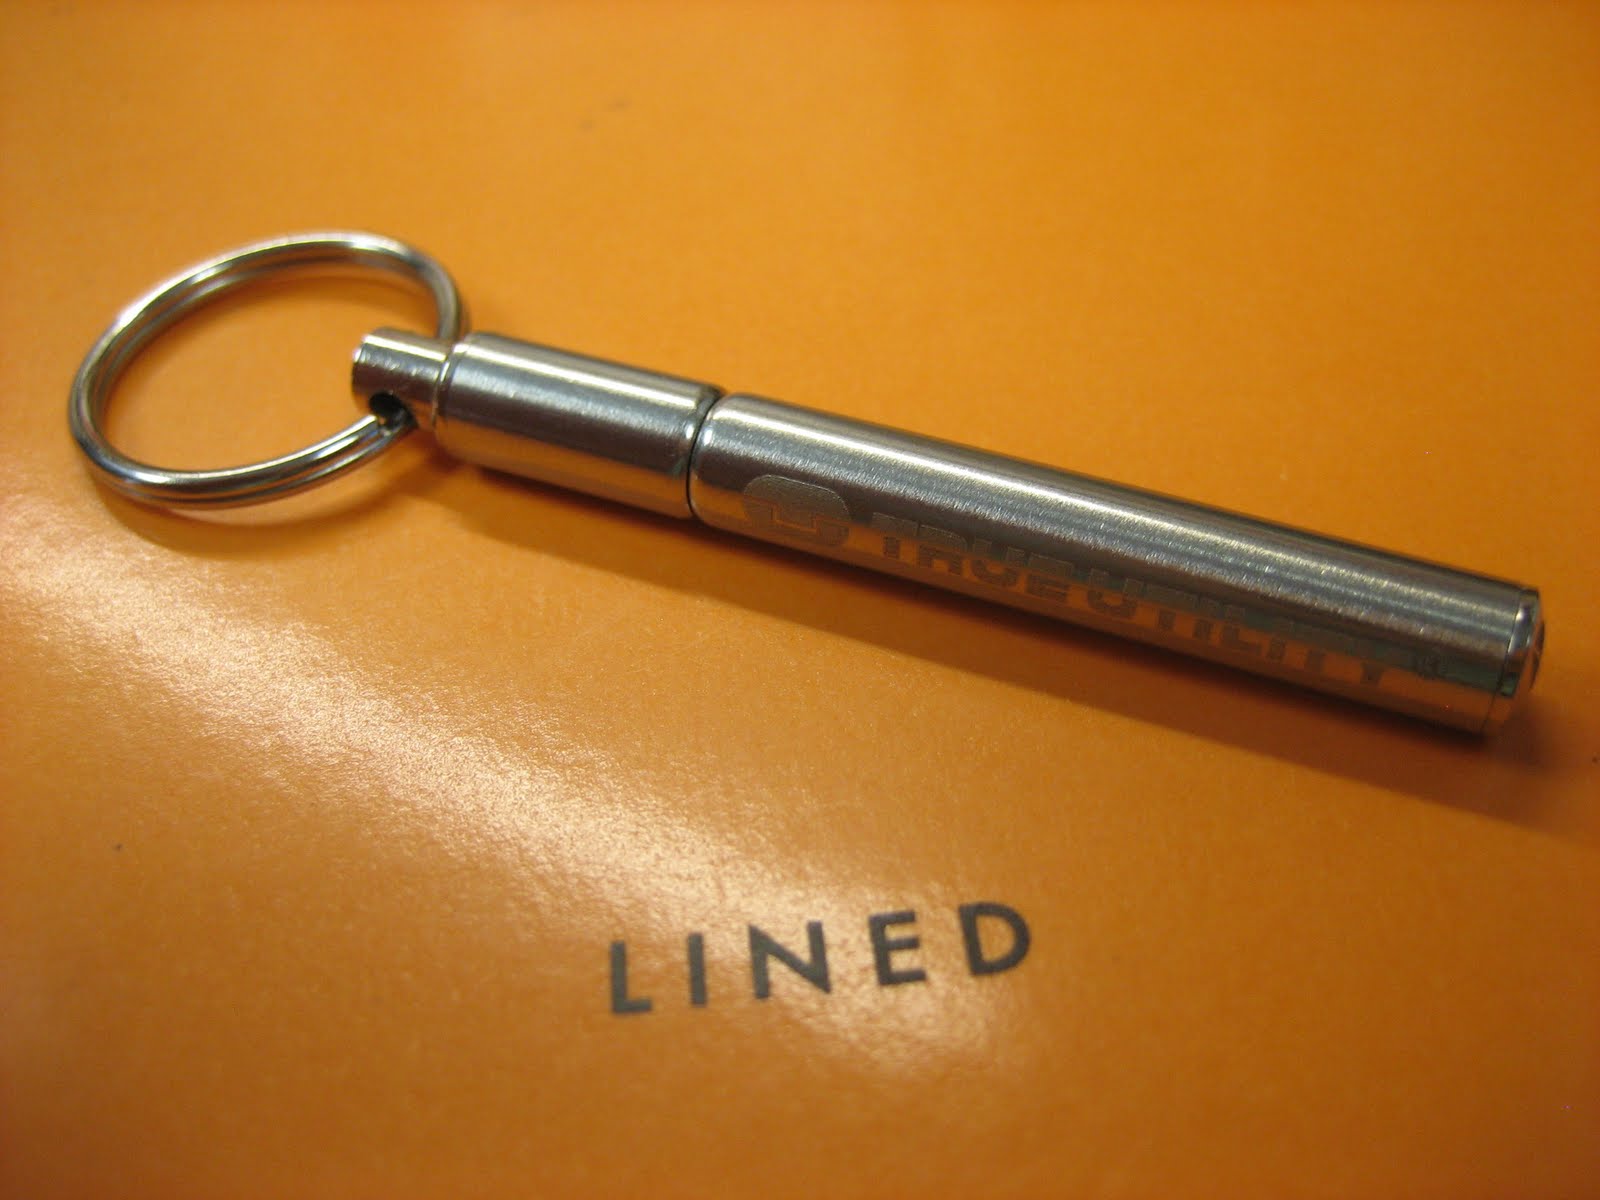 The Penny Writer.: TelePen Keychain Pen Review